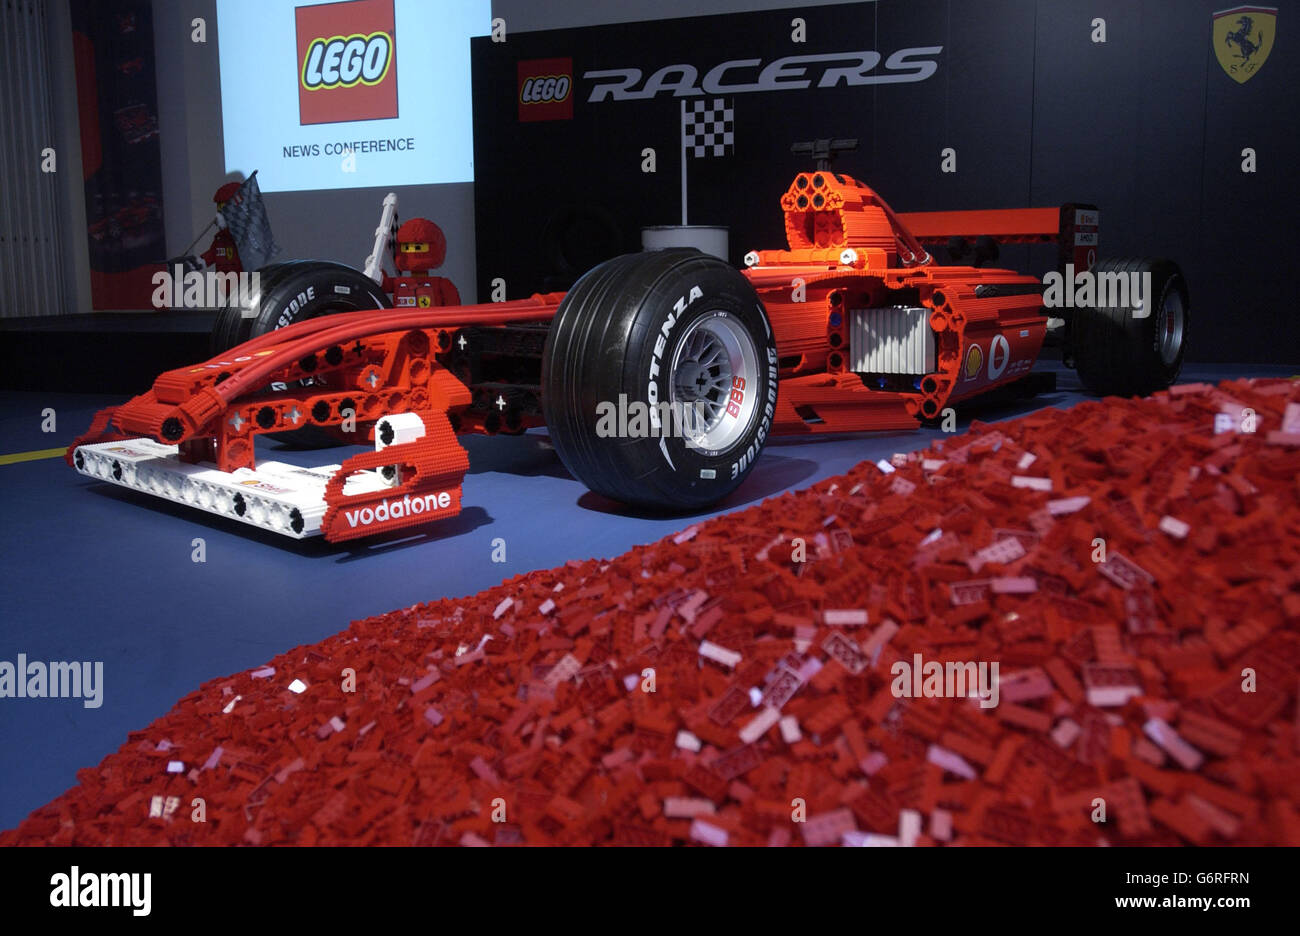 The first ever life-size LEGO Ferrari F1 car made from a mountain